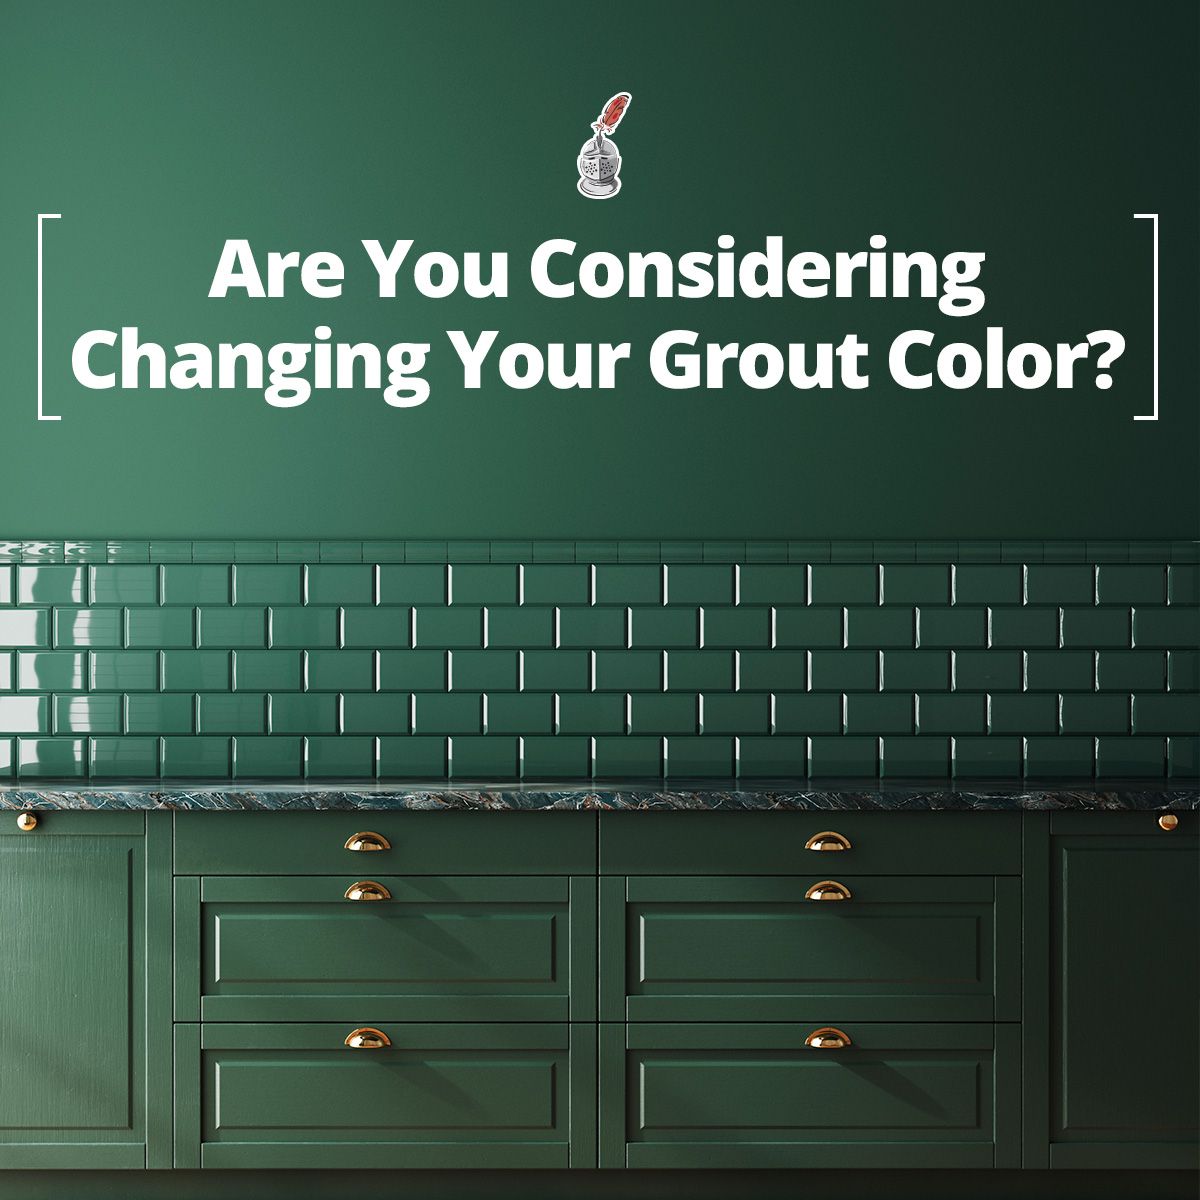 Are You Considering Changing Your Grout Color?